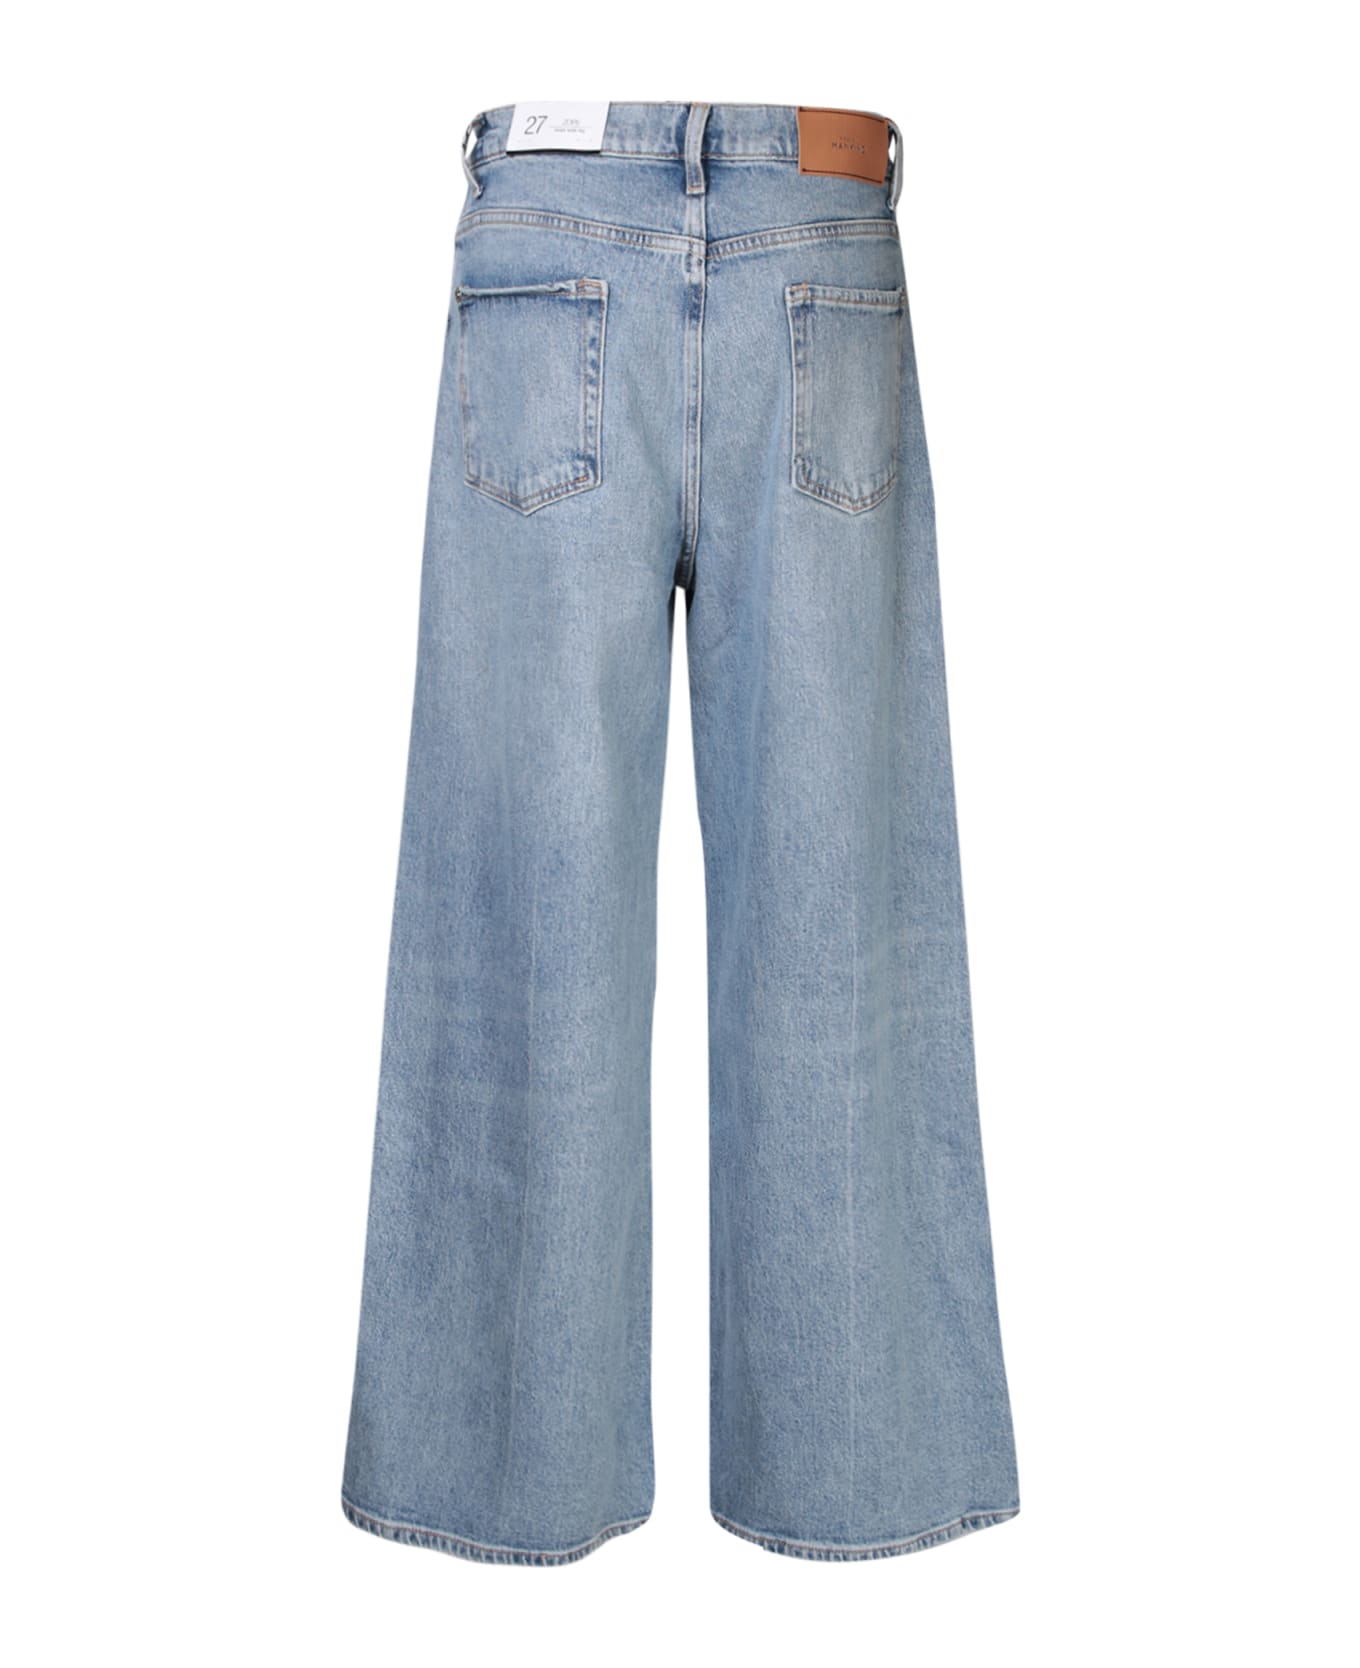 7 For All Mankind Zoey Wide Leg Light Blue Jeans - Blue